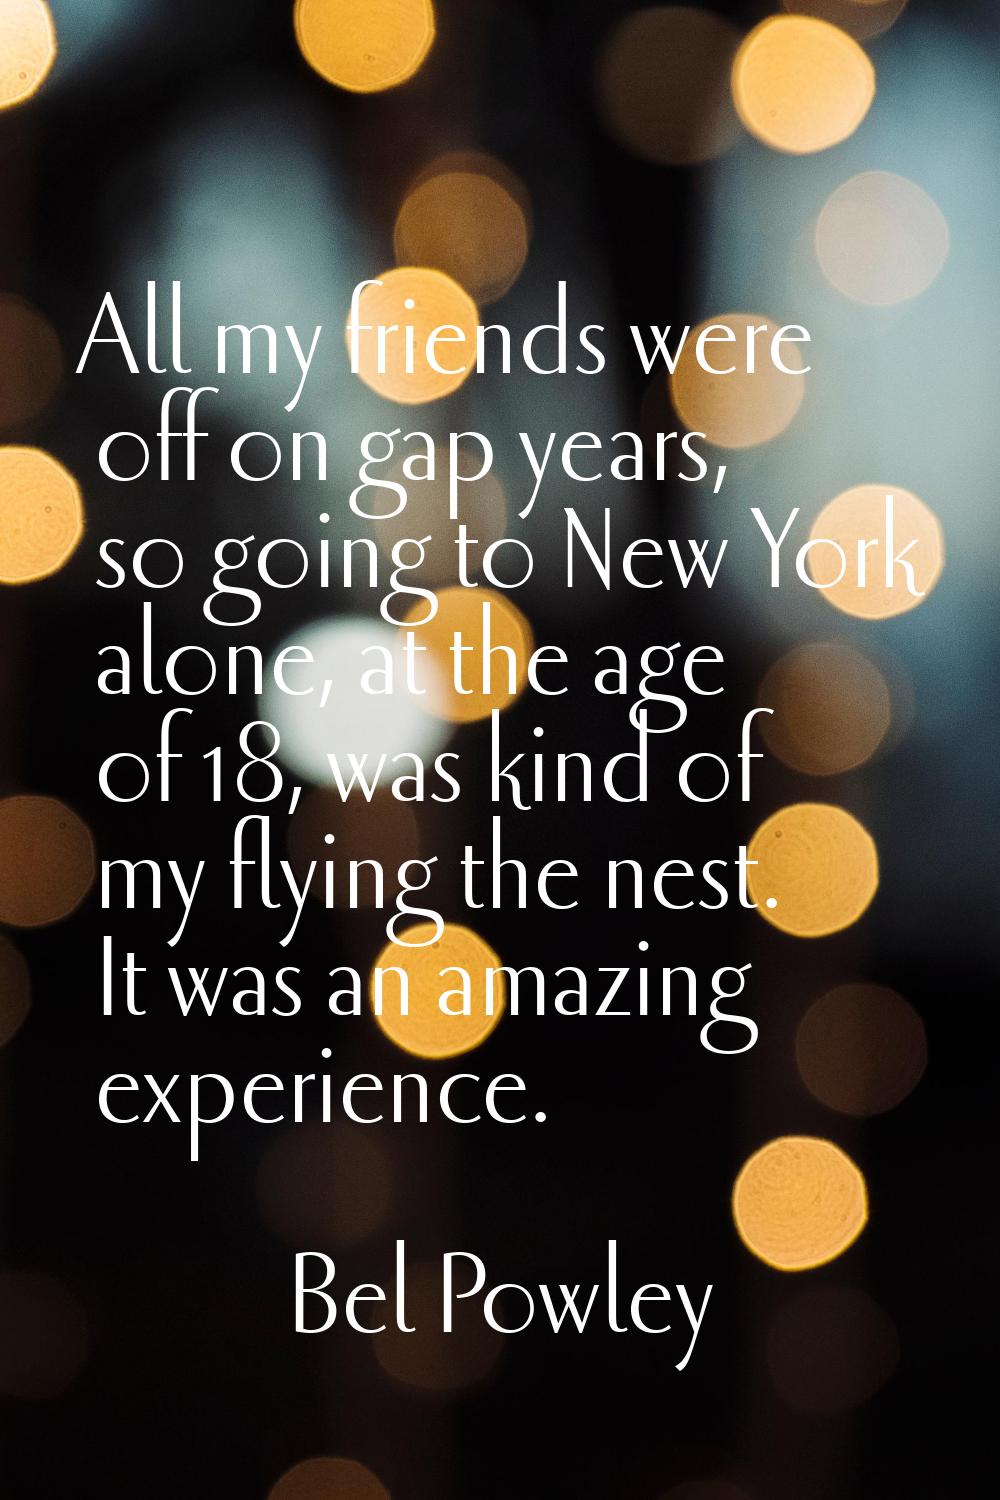 All my friends were off on gap years, so going to New York alone, at the age of 18, was kind of my 